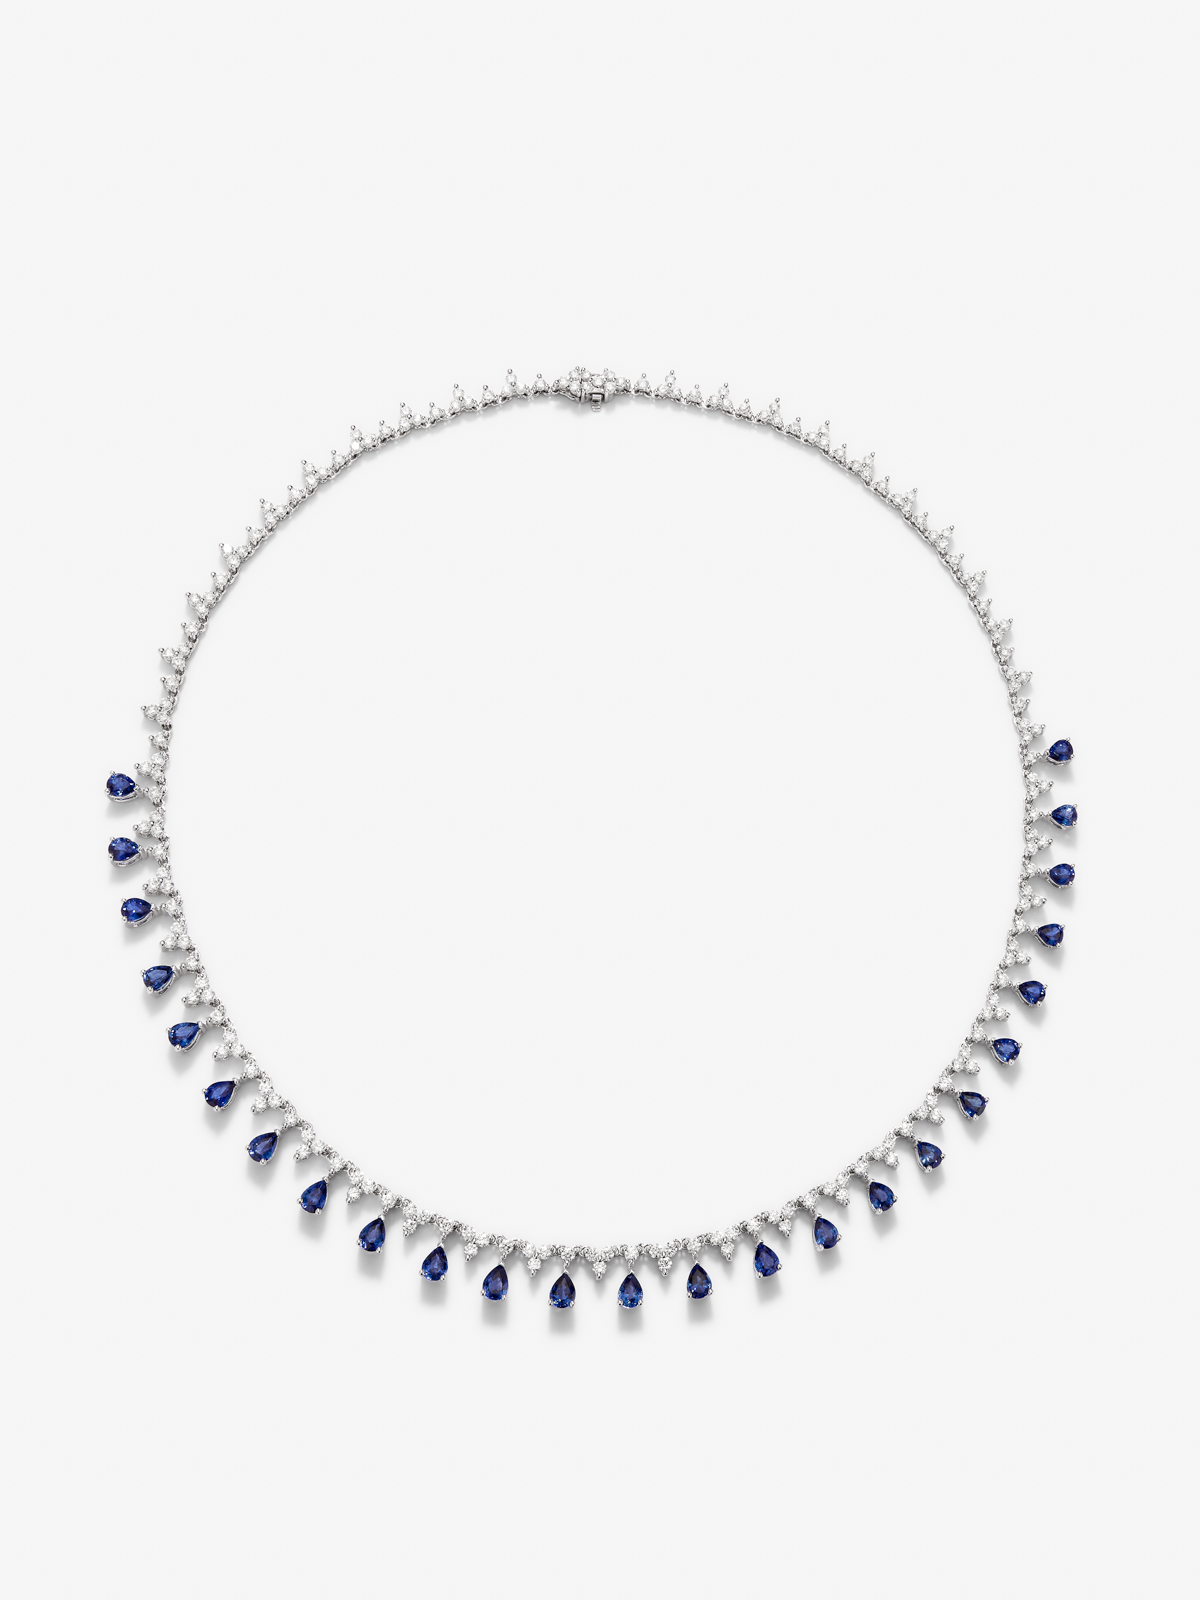 18K White Gold Rivière Collar with blue skews in 6.51 cts and white diamonds in 6.16 cts bright size